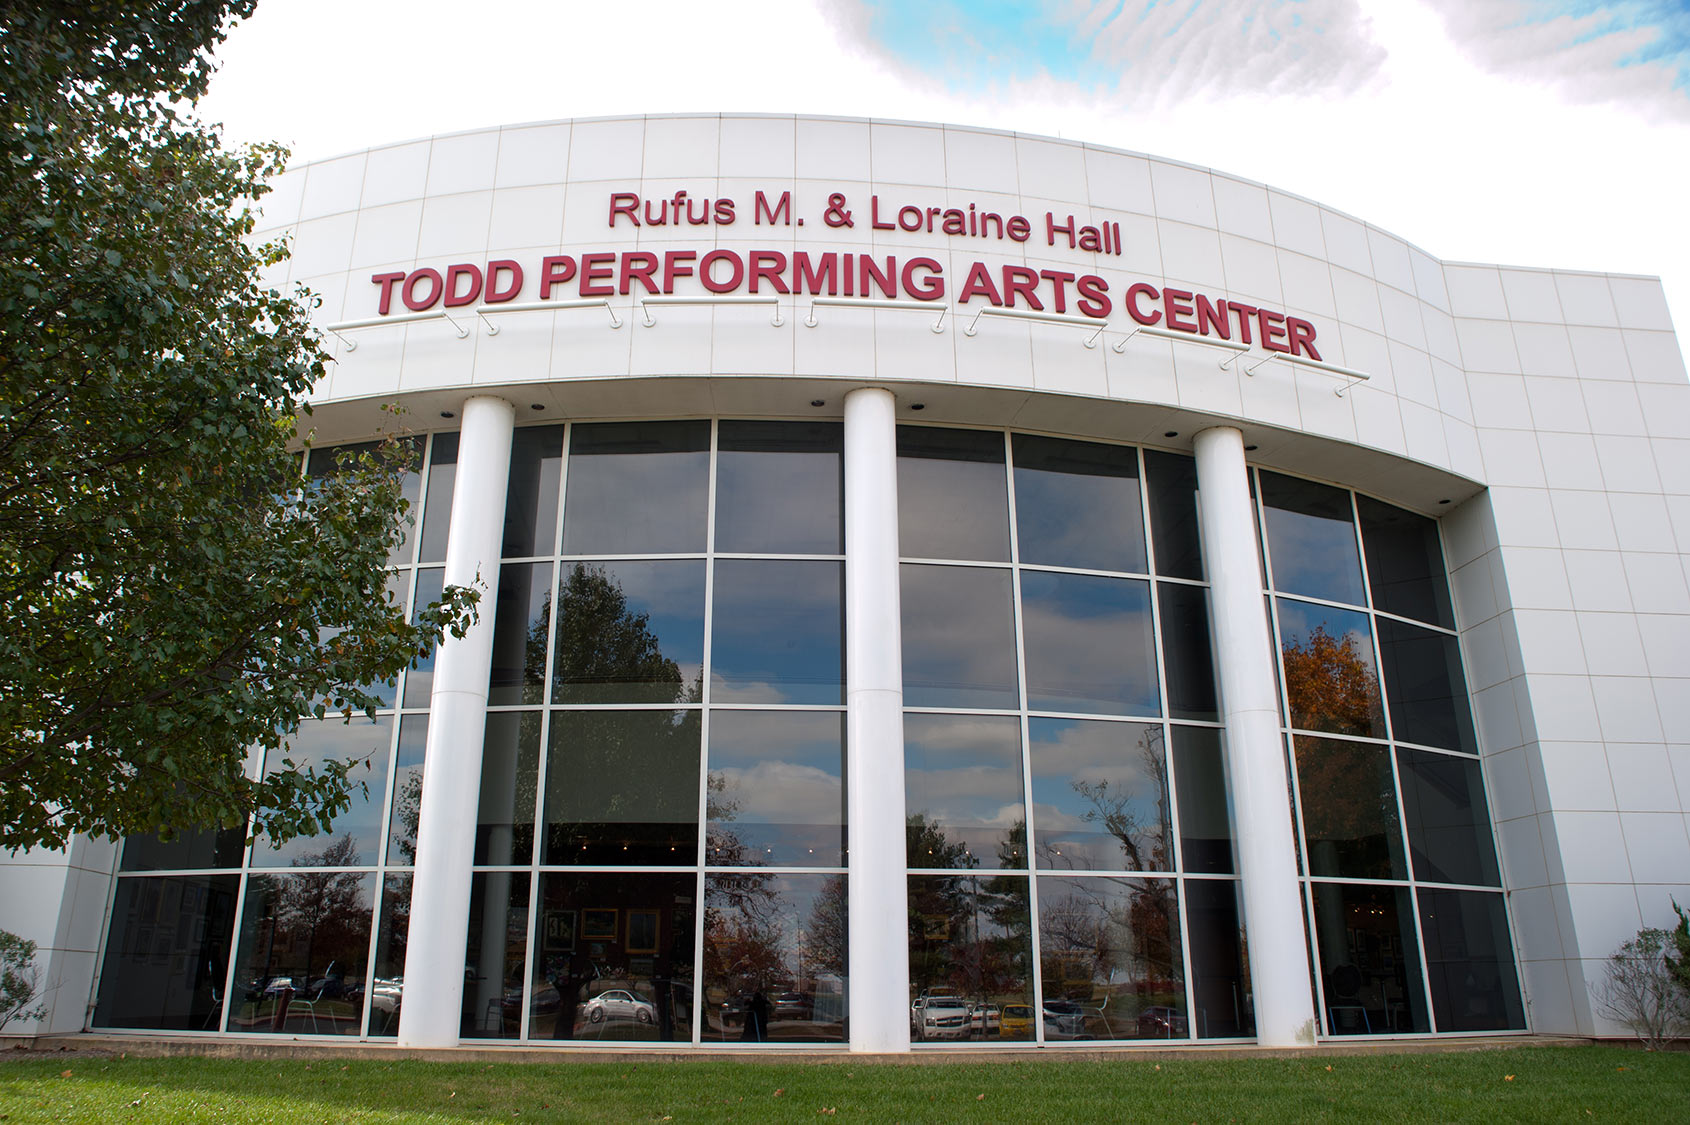 Todd Center for the Performing Arts #6 News